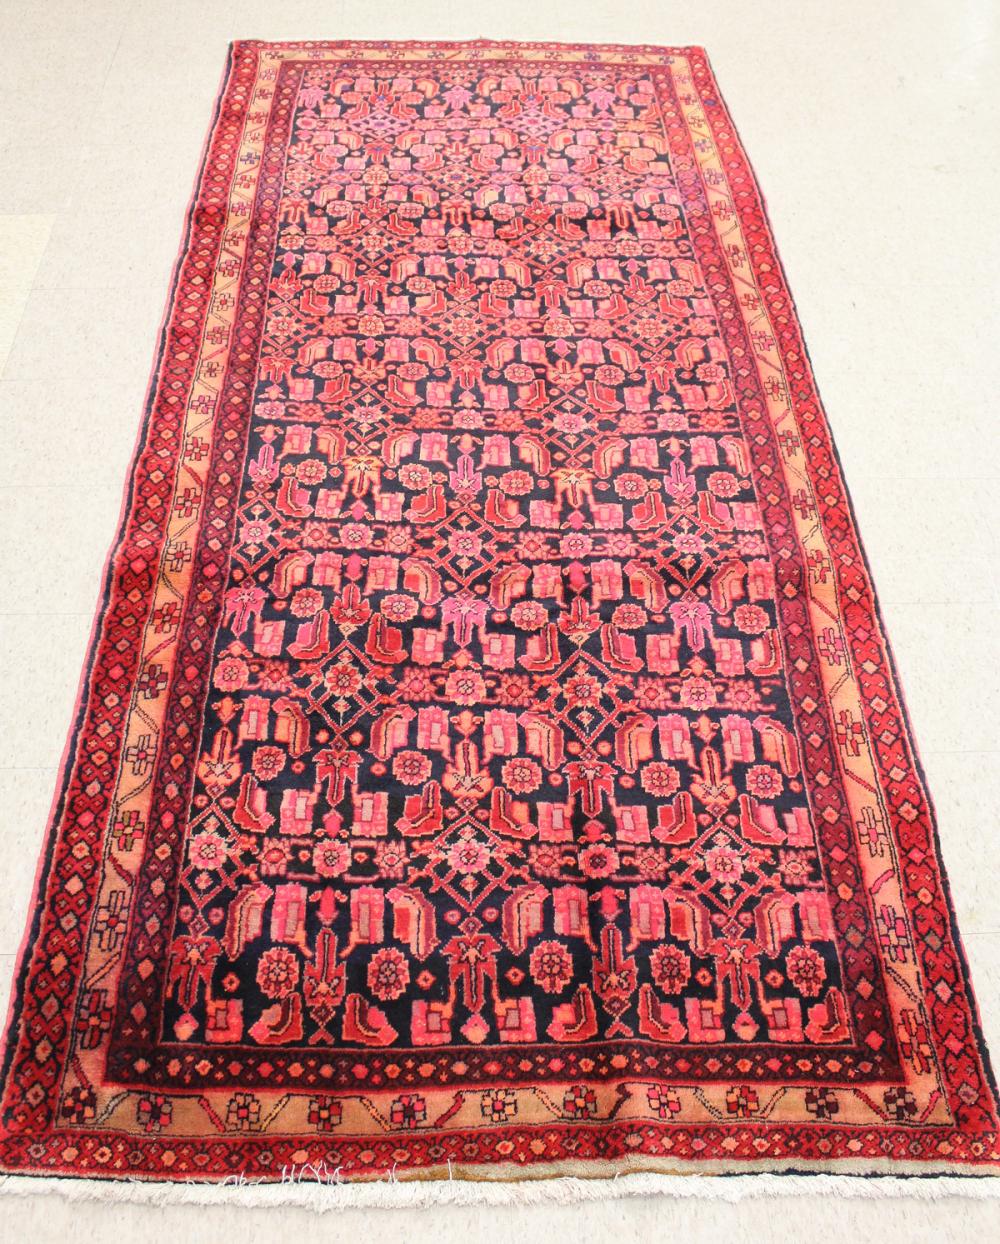 HAND KNOTTED PERSIAN AREA RUG  33e229